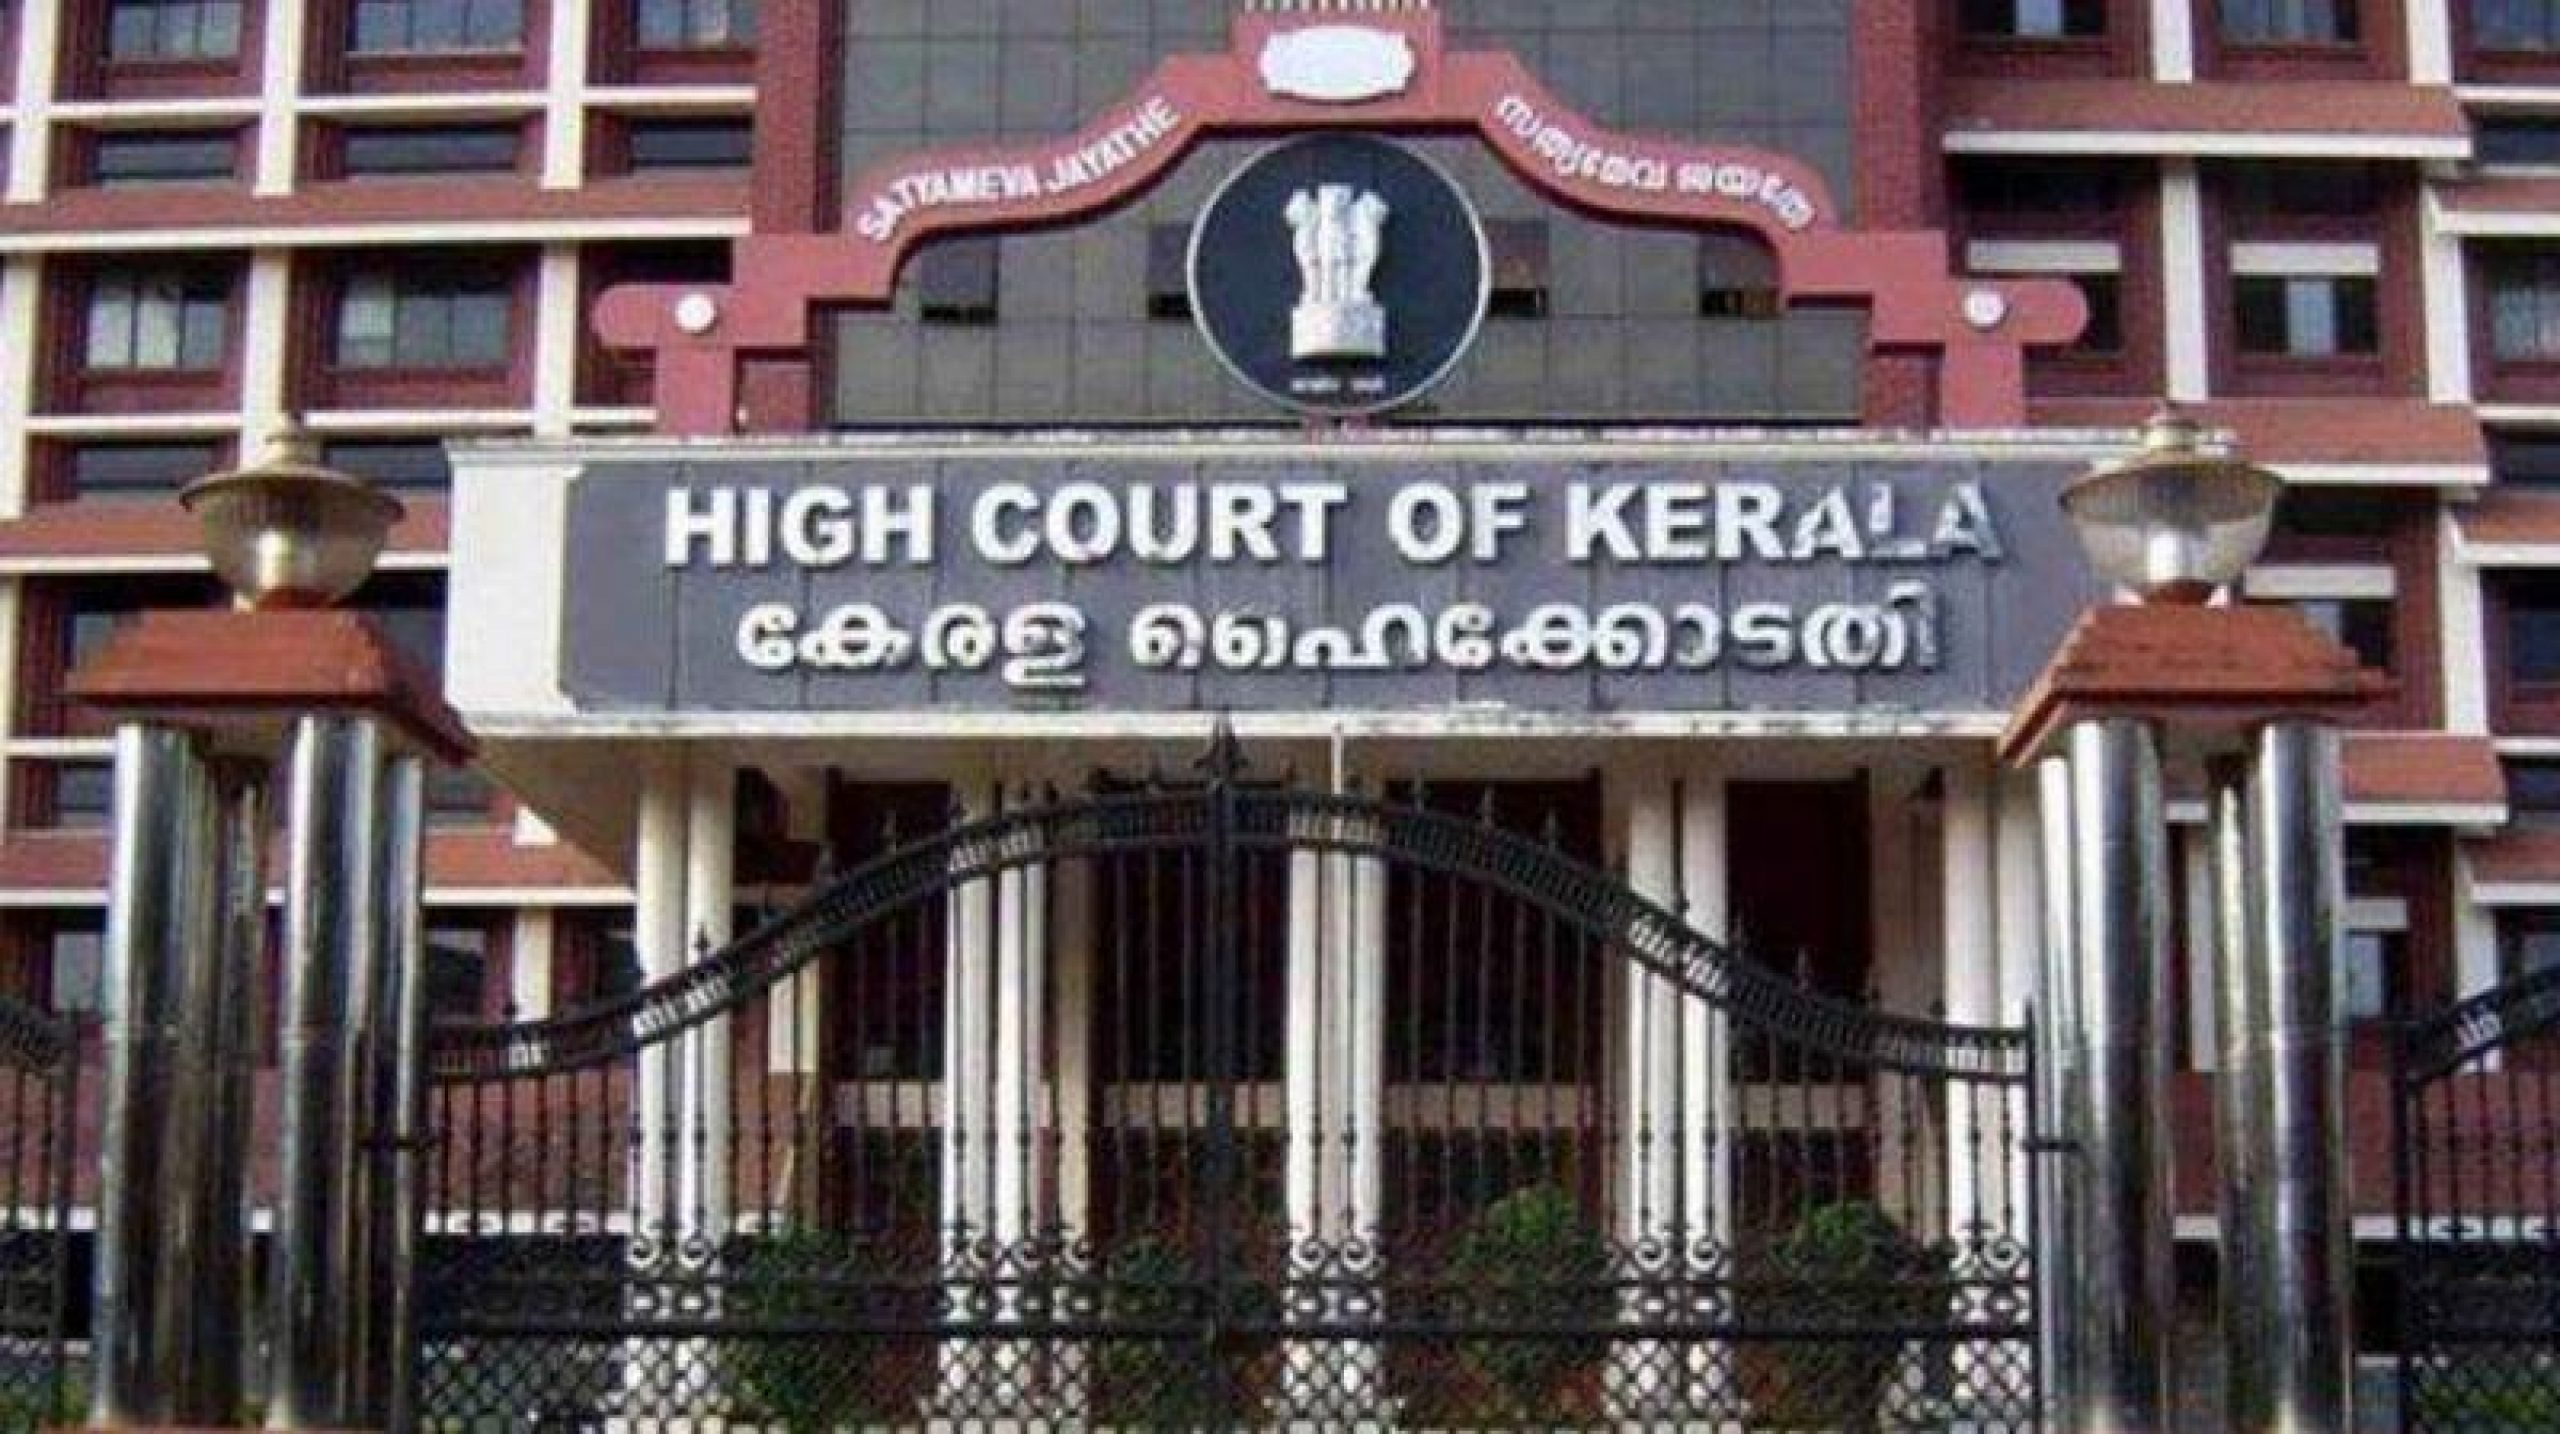 Over 20,000 litres of spirit stolen from TSCL: Ker HC rejects bail plea of arrested